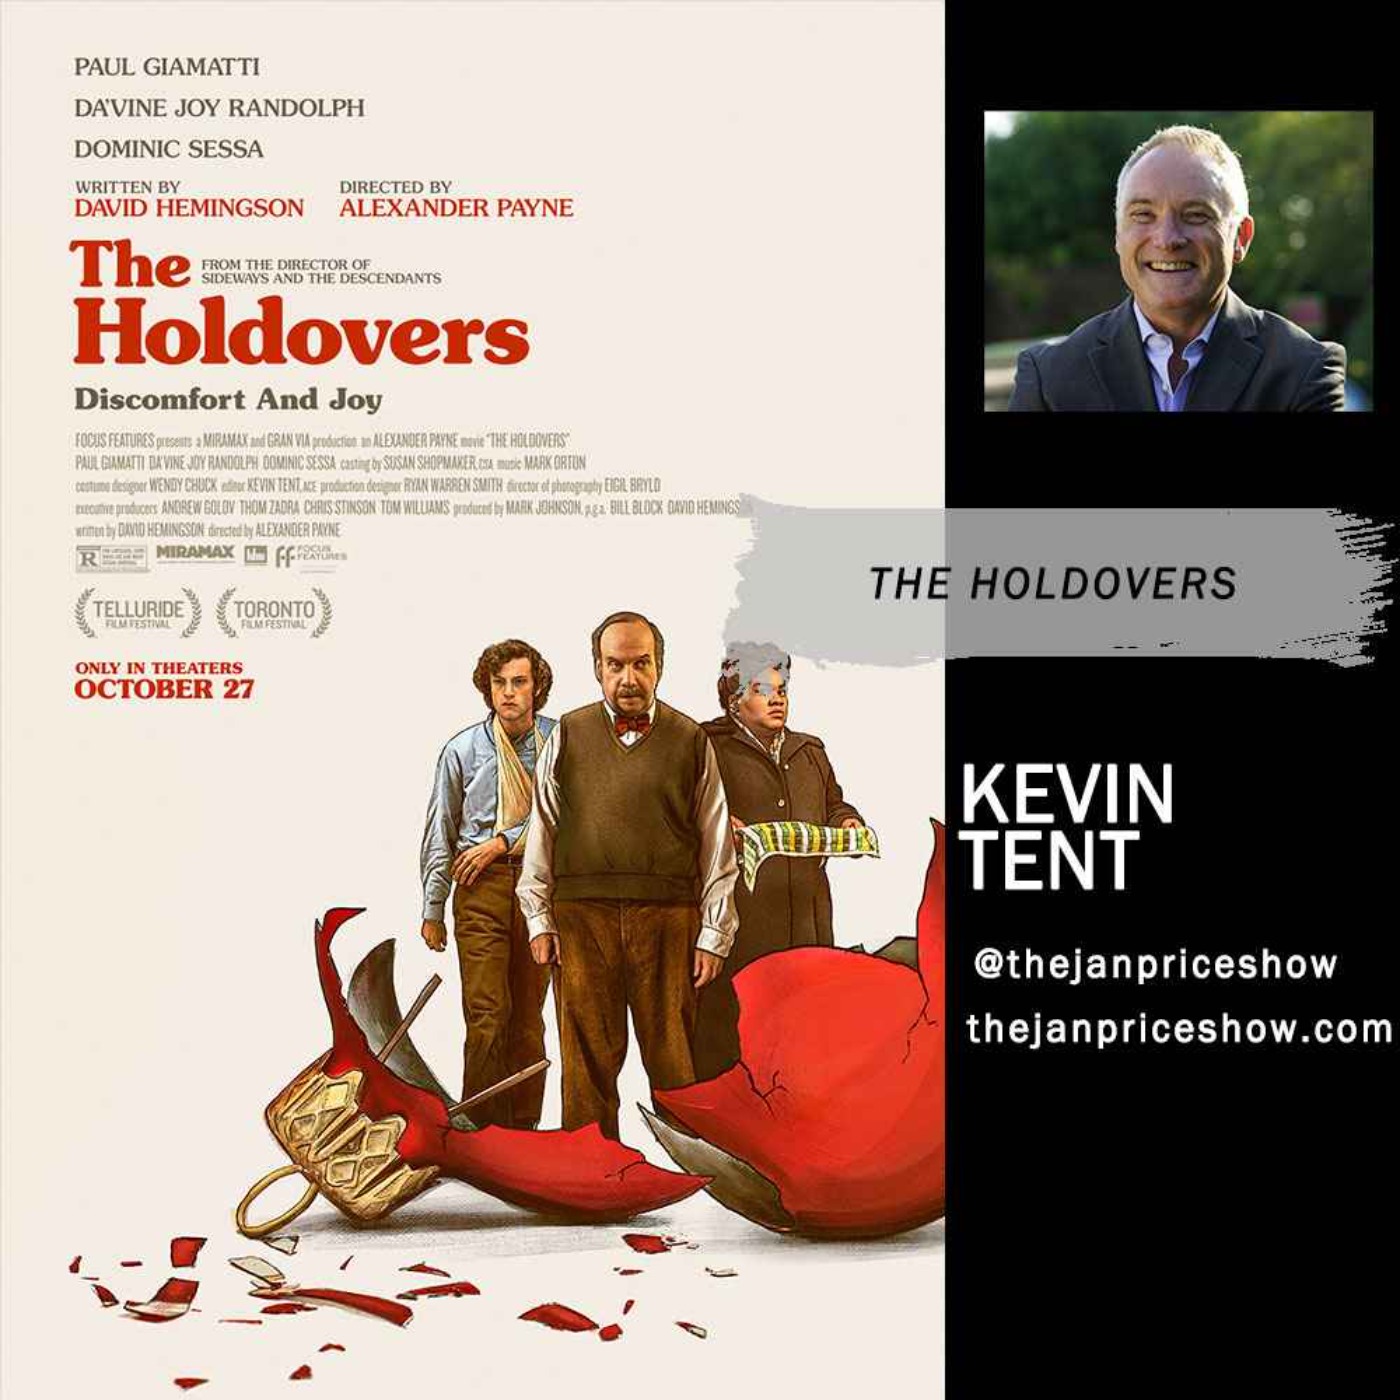 Kevin Tent - The Holdovers